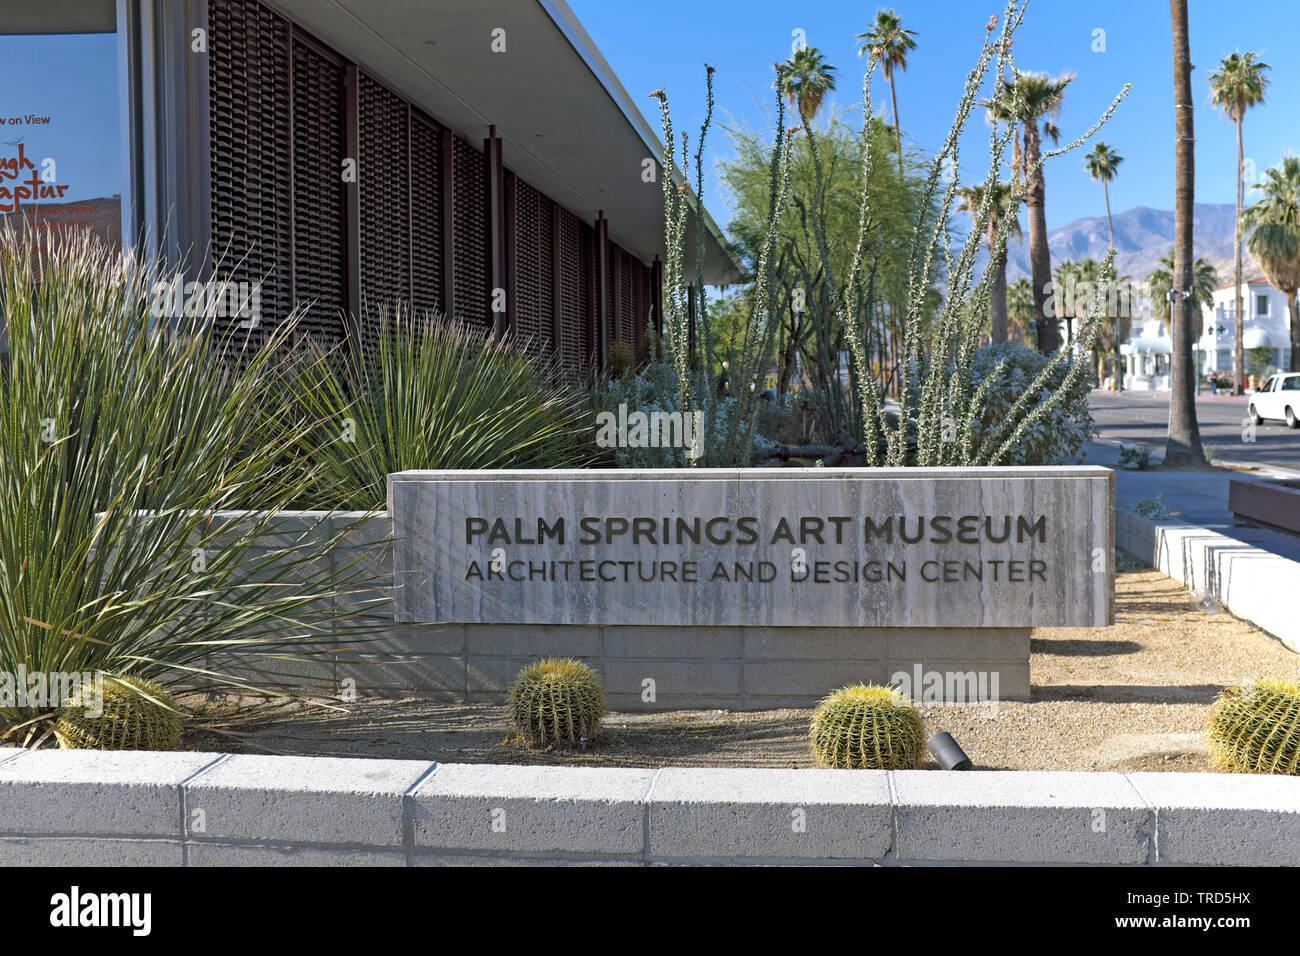 Das Palm Springs Art Museum Architecture and Design Center in Palm Springs, Kalifornien, USA. Stockfoto